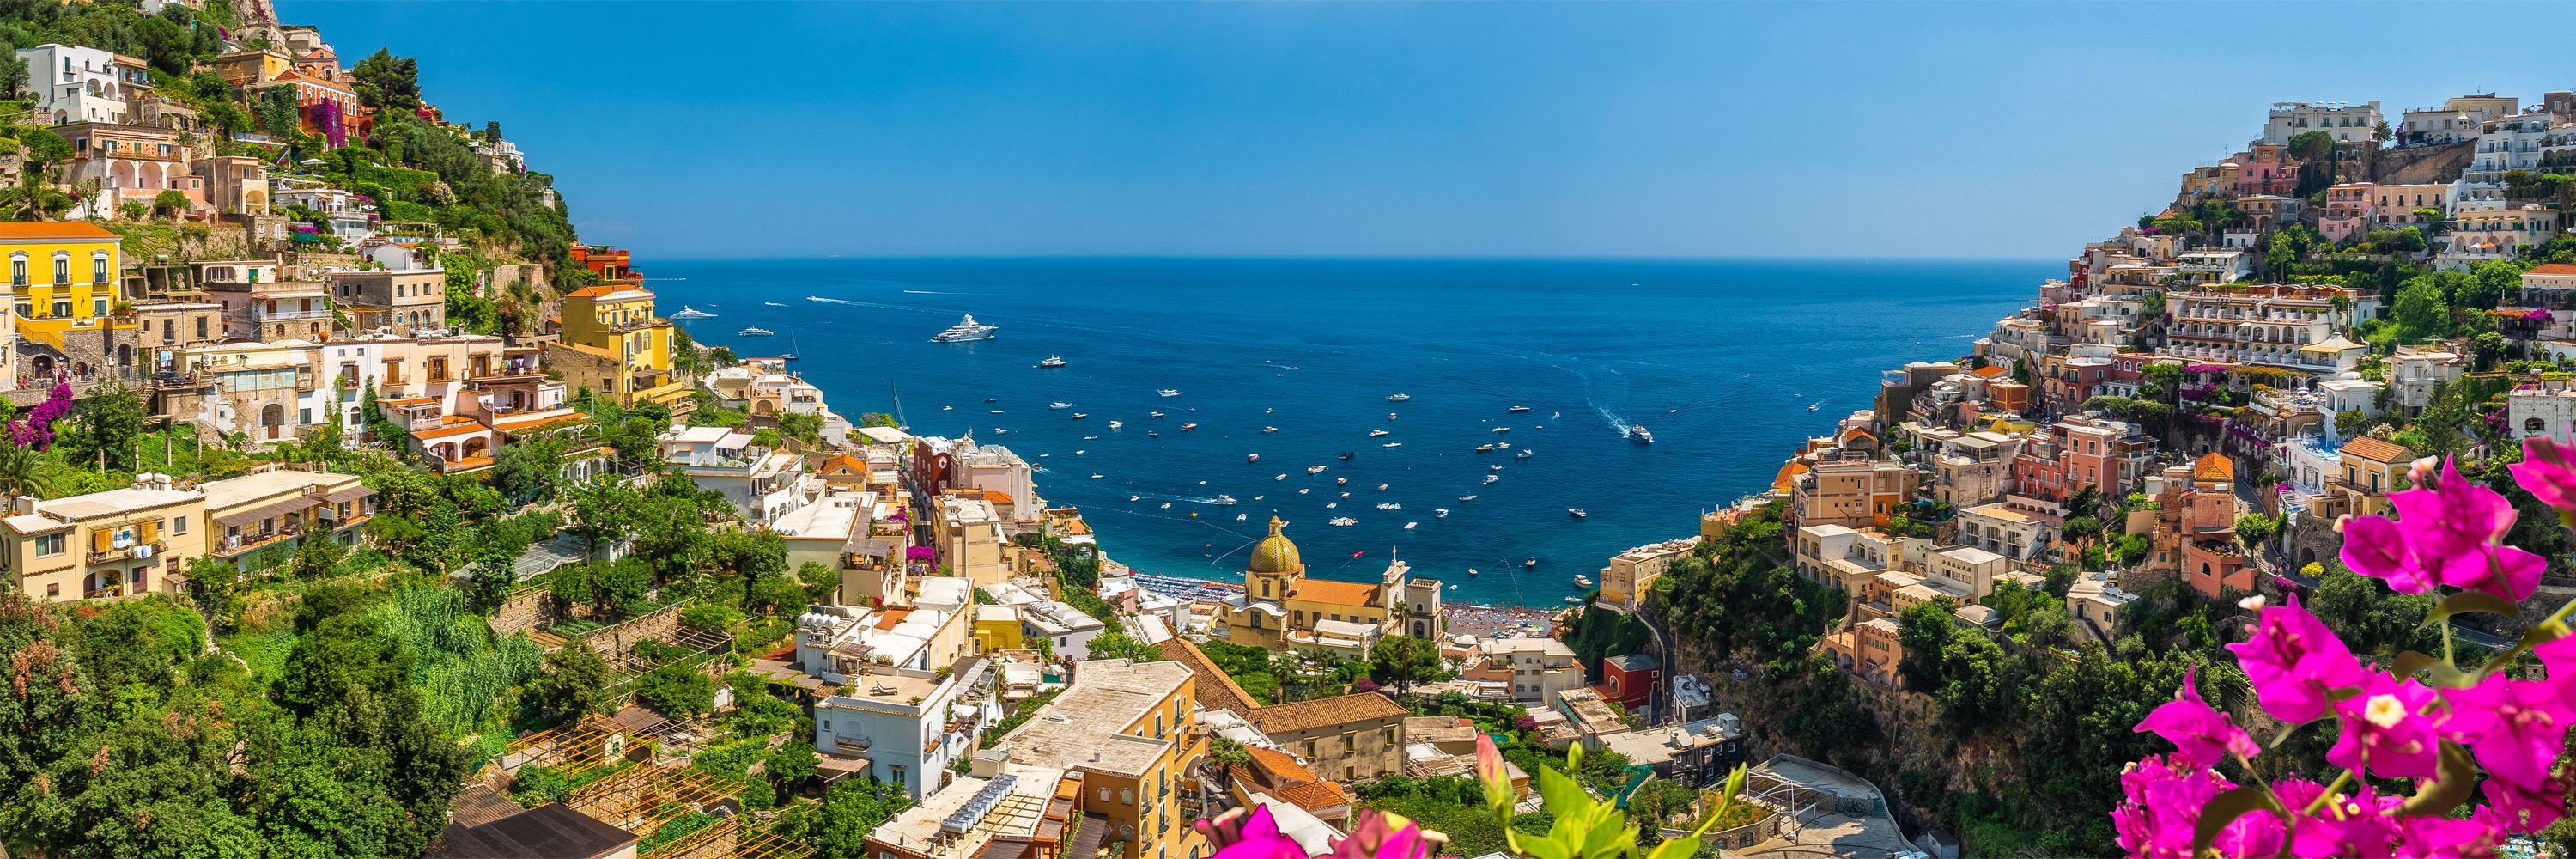 Guide to exploring the Amalfi Coast and Capri Audley Travel